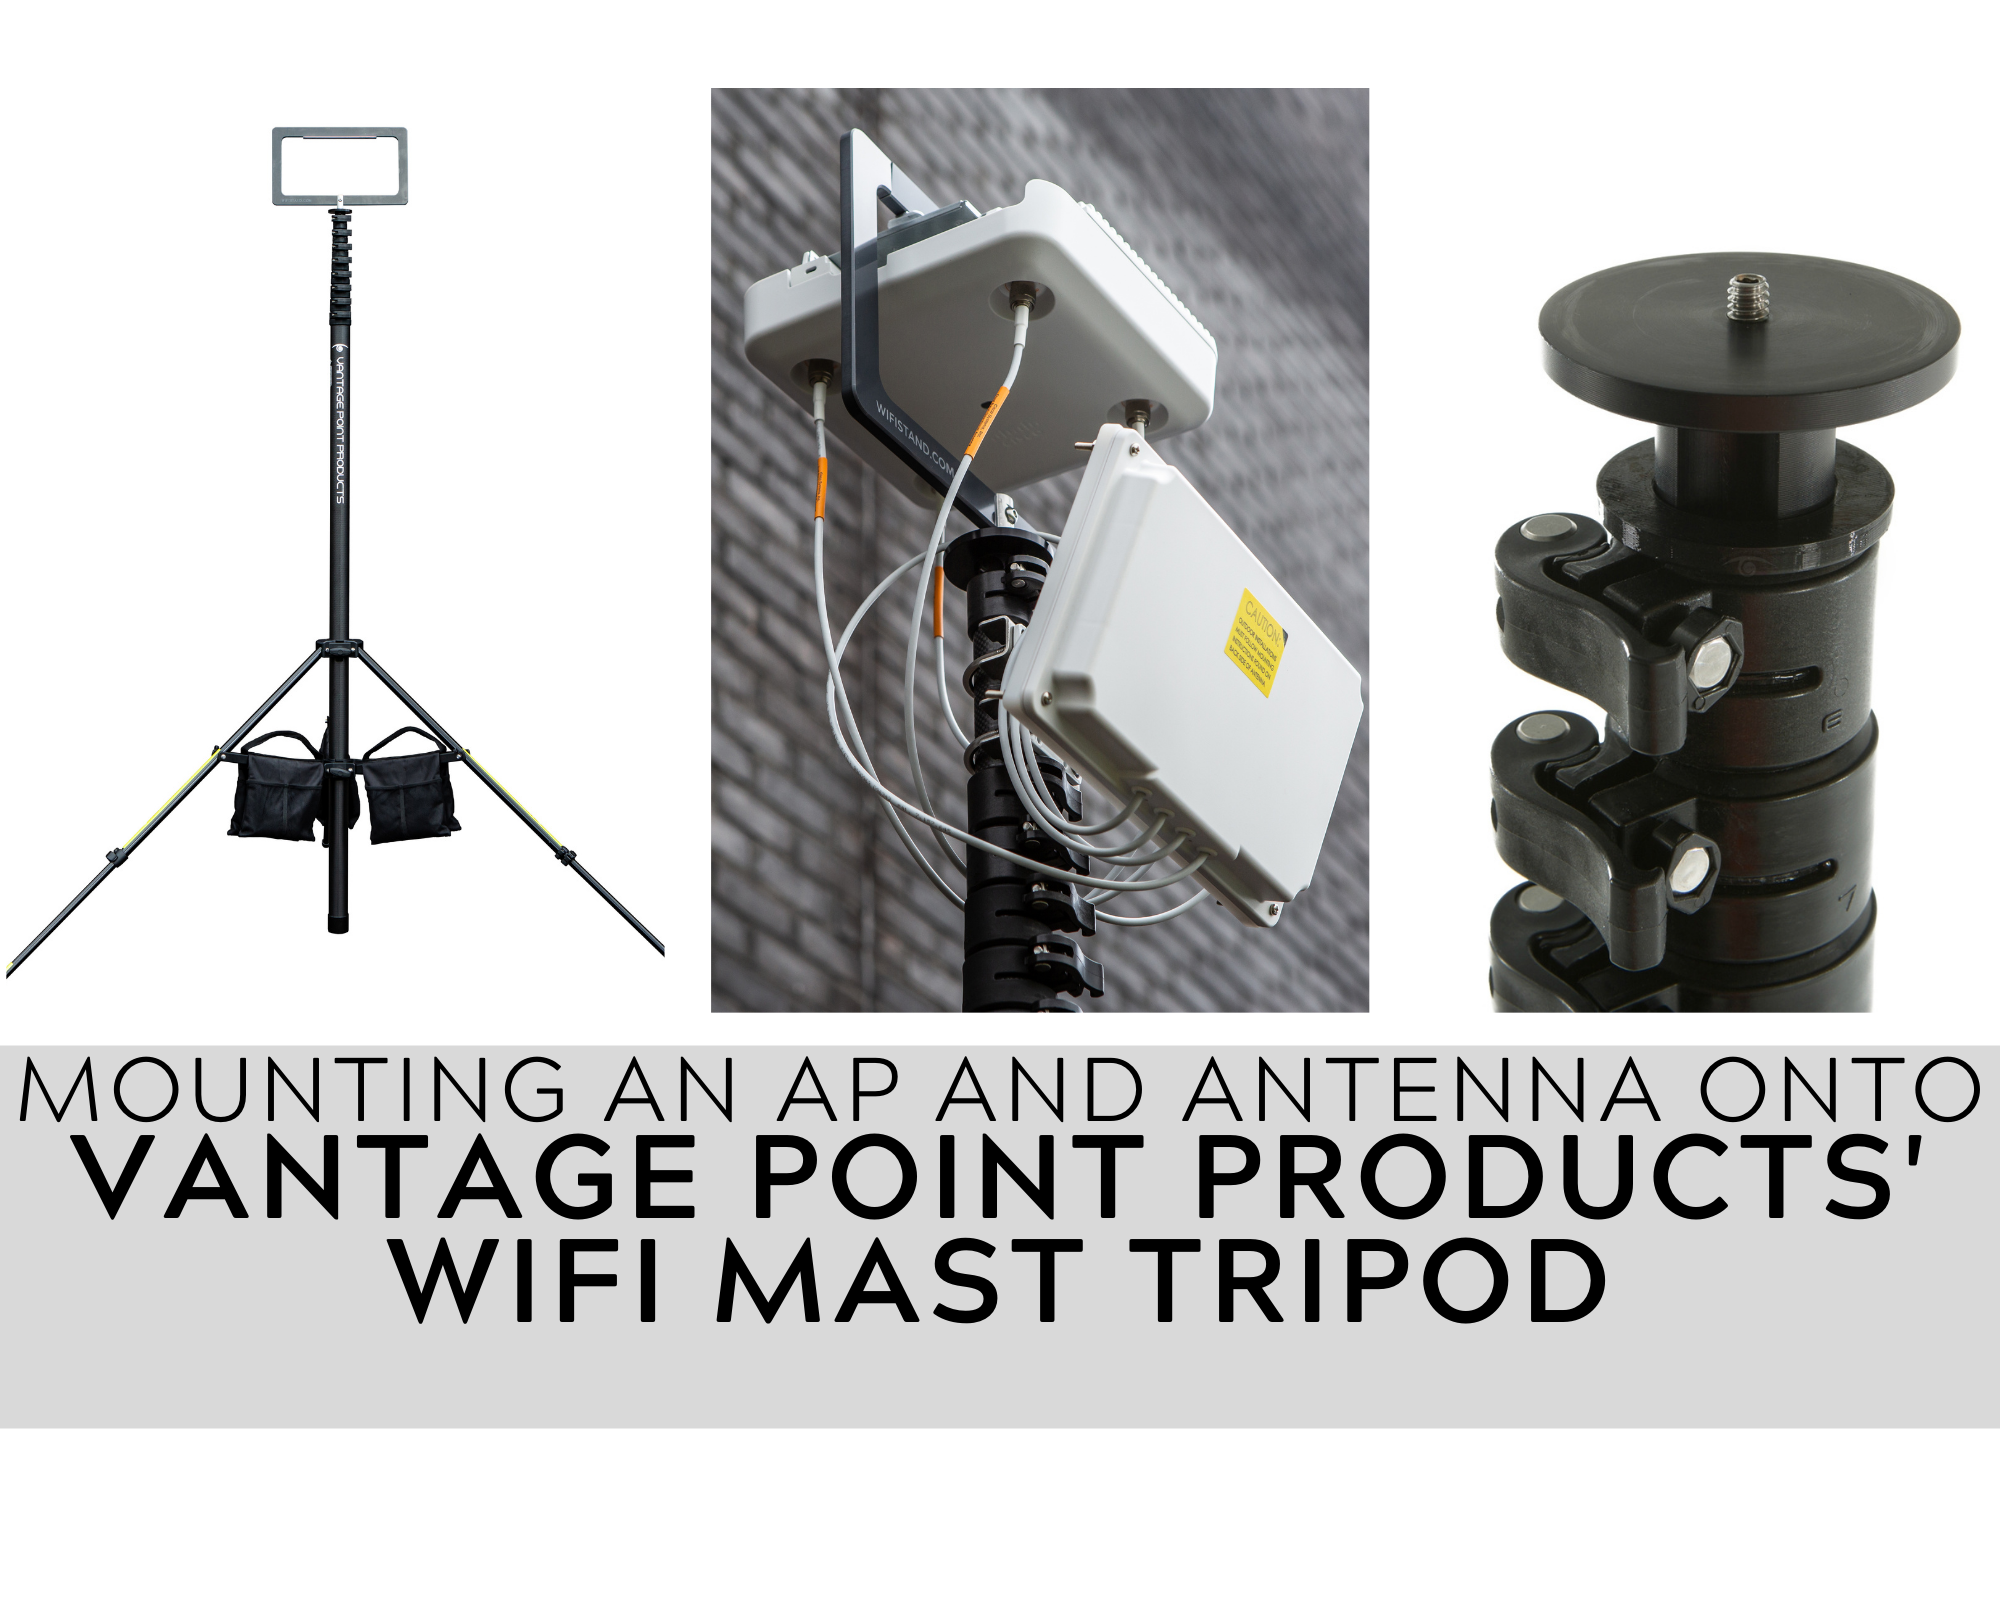 How to Mount an AP & Antenna on a WiFiStand for Warehouse WiFi Surveys